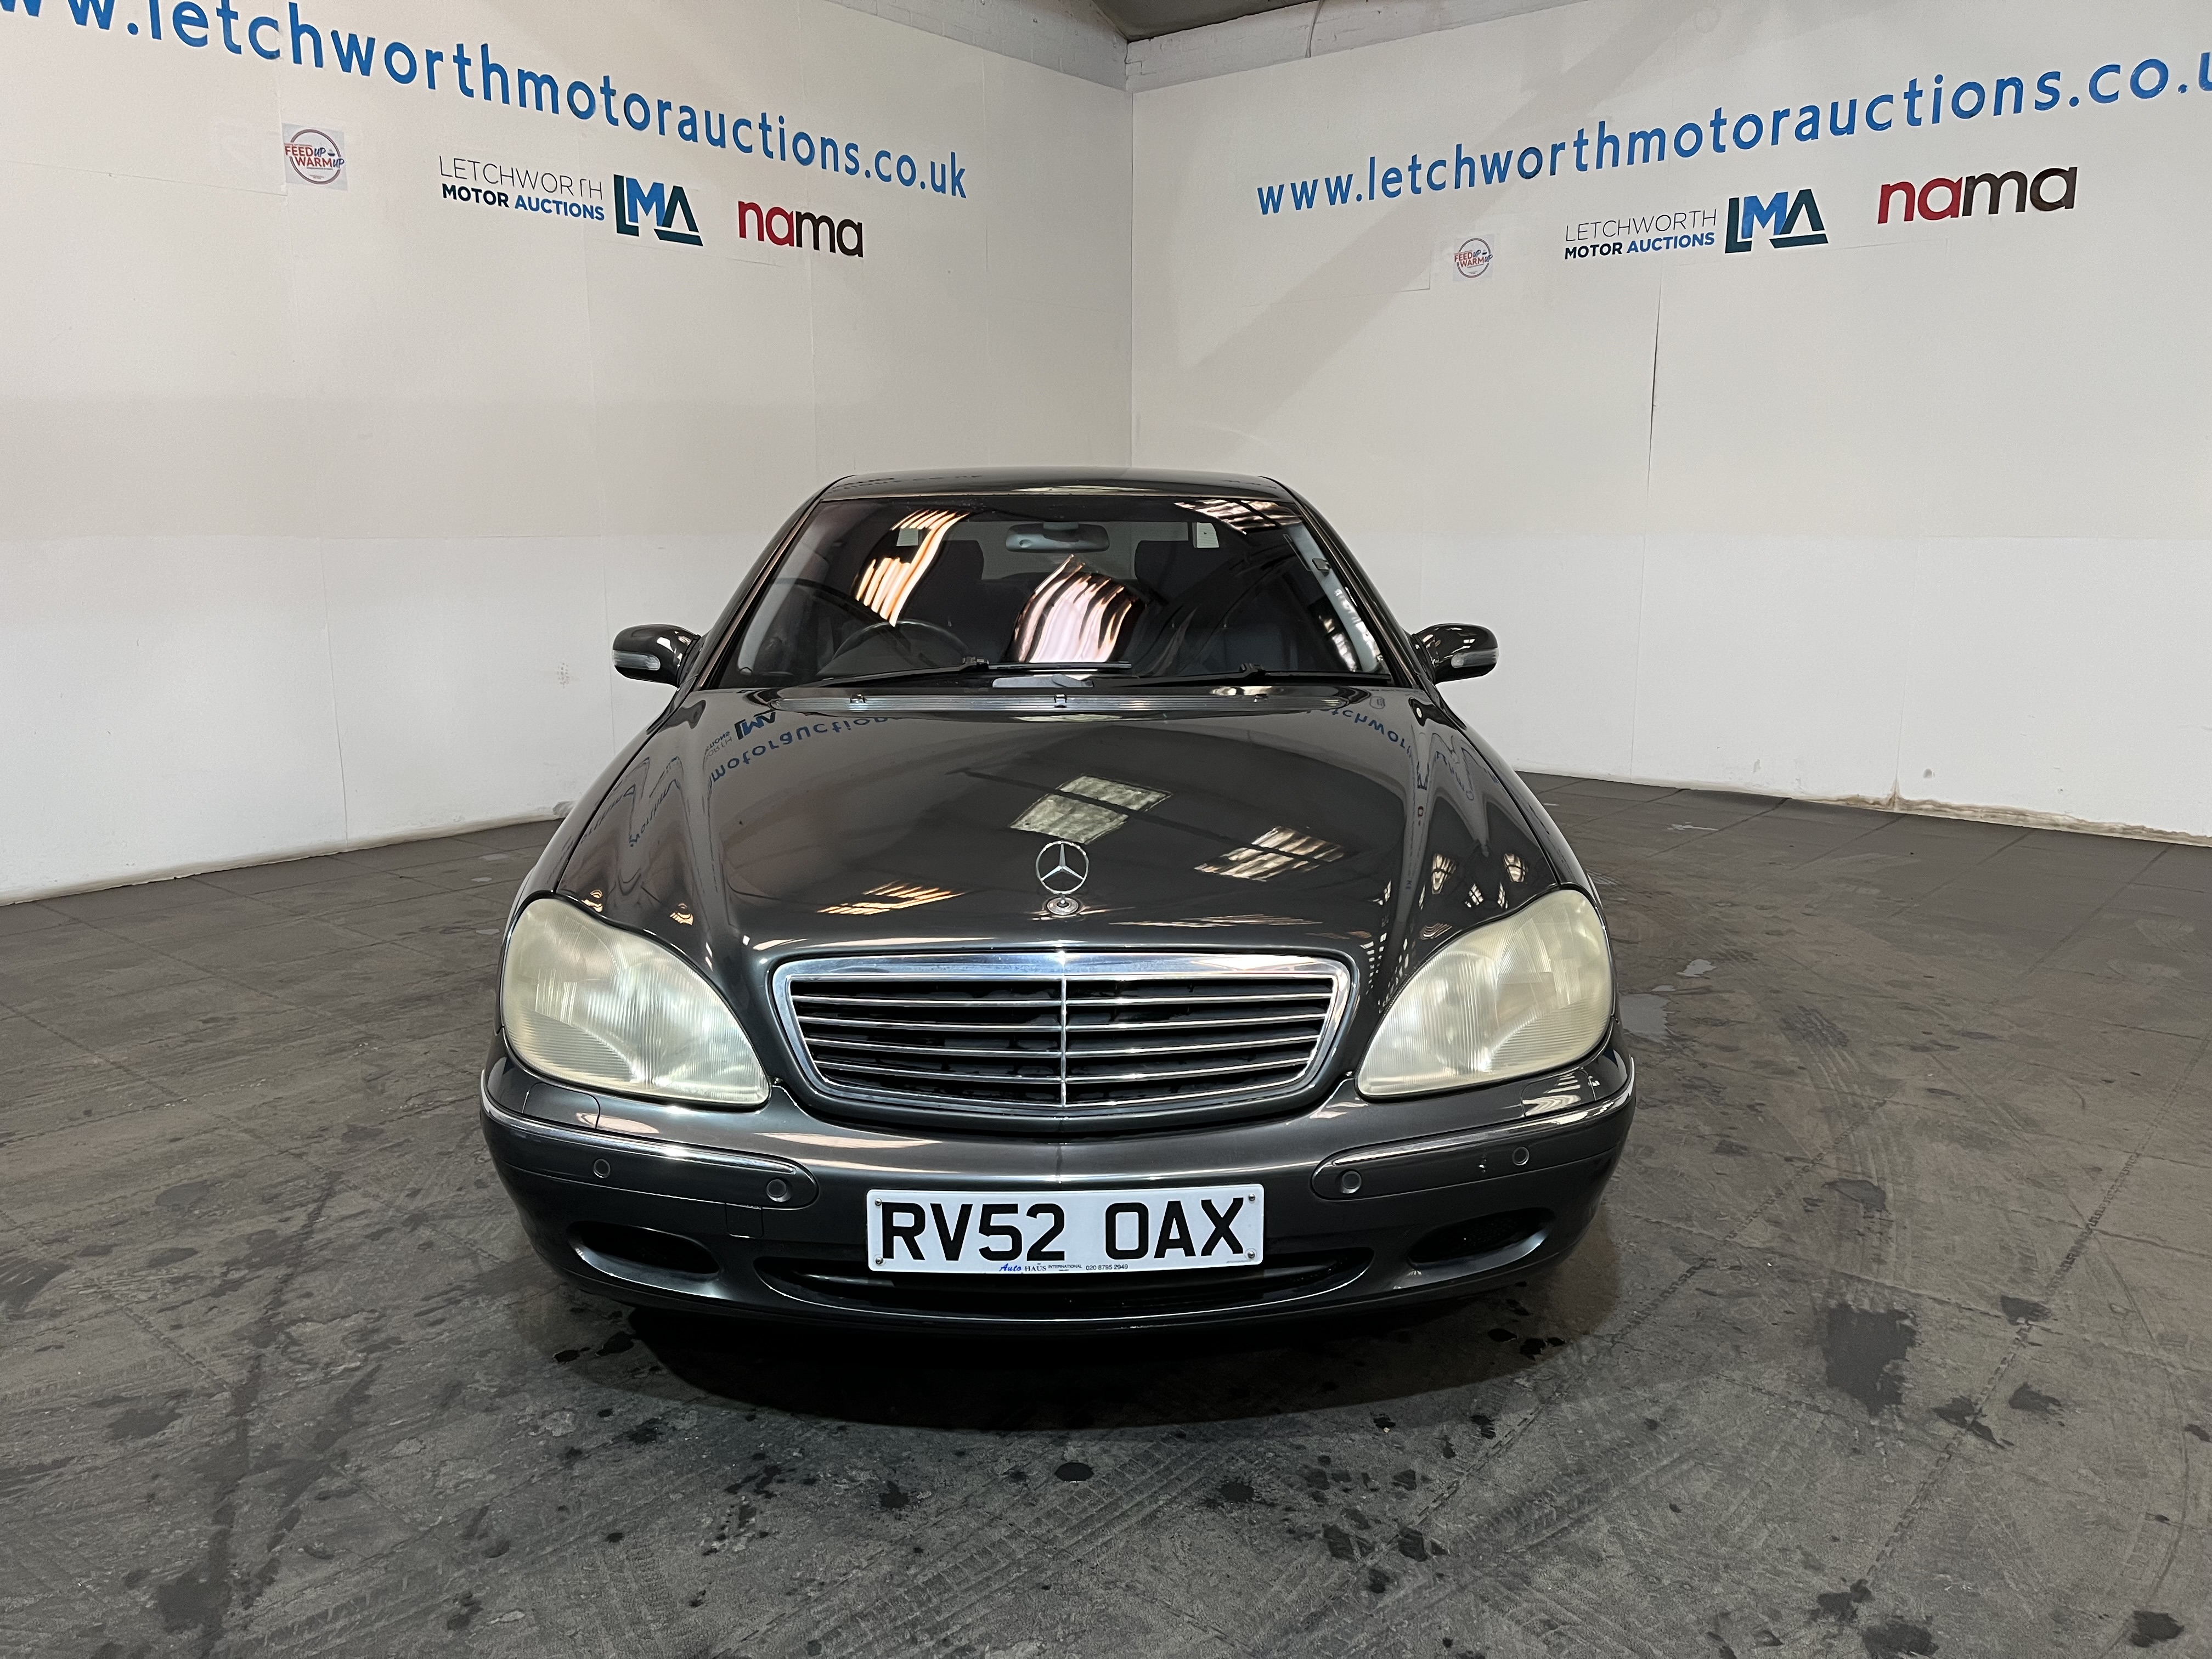 2002 Mercedes S320L Auto - 3199cc - ONE OWNER AND 11,455 MILES FROM NEW - Image 2 of 28